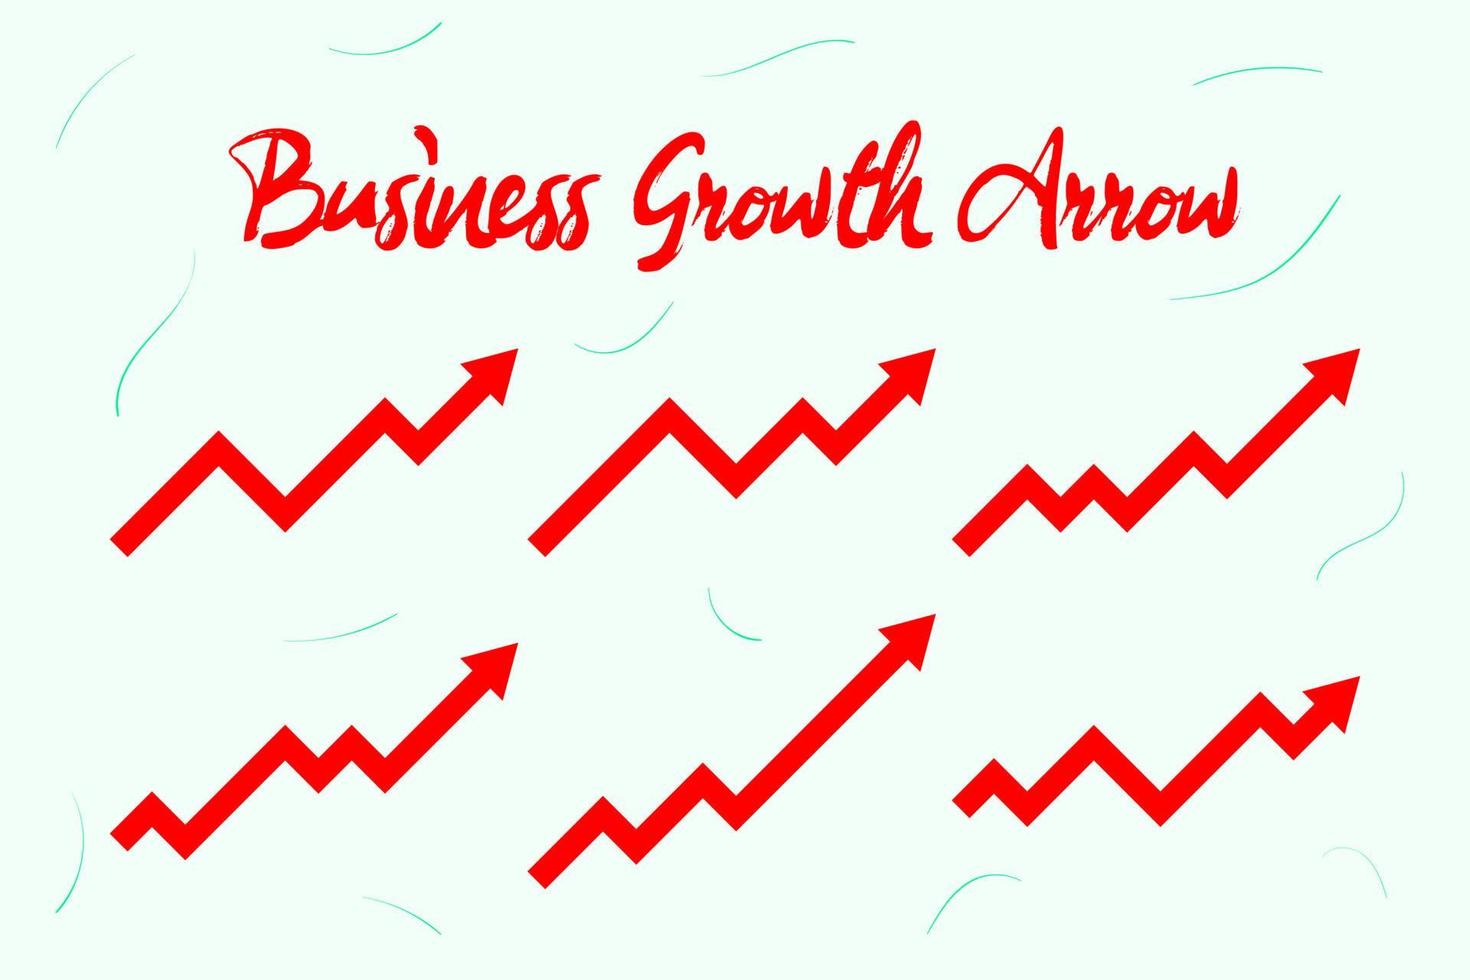 Arrow indicating up for business growth vector shape objects.